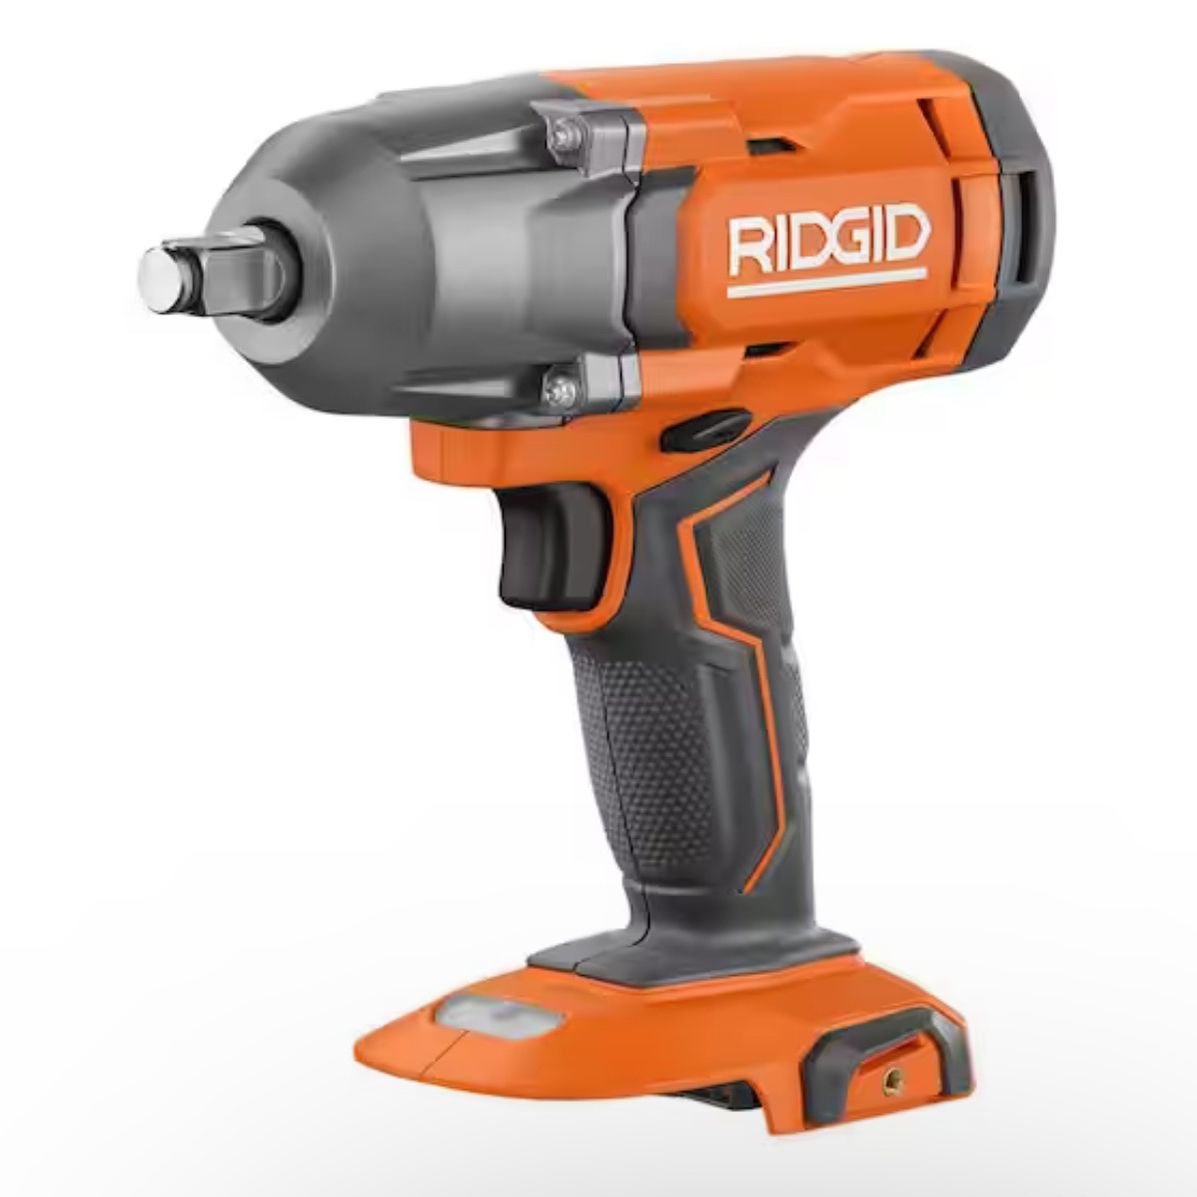 Ridgid 18V 1/2” Impact Wrench (Tool Only)